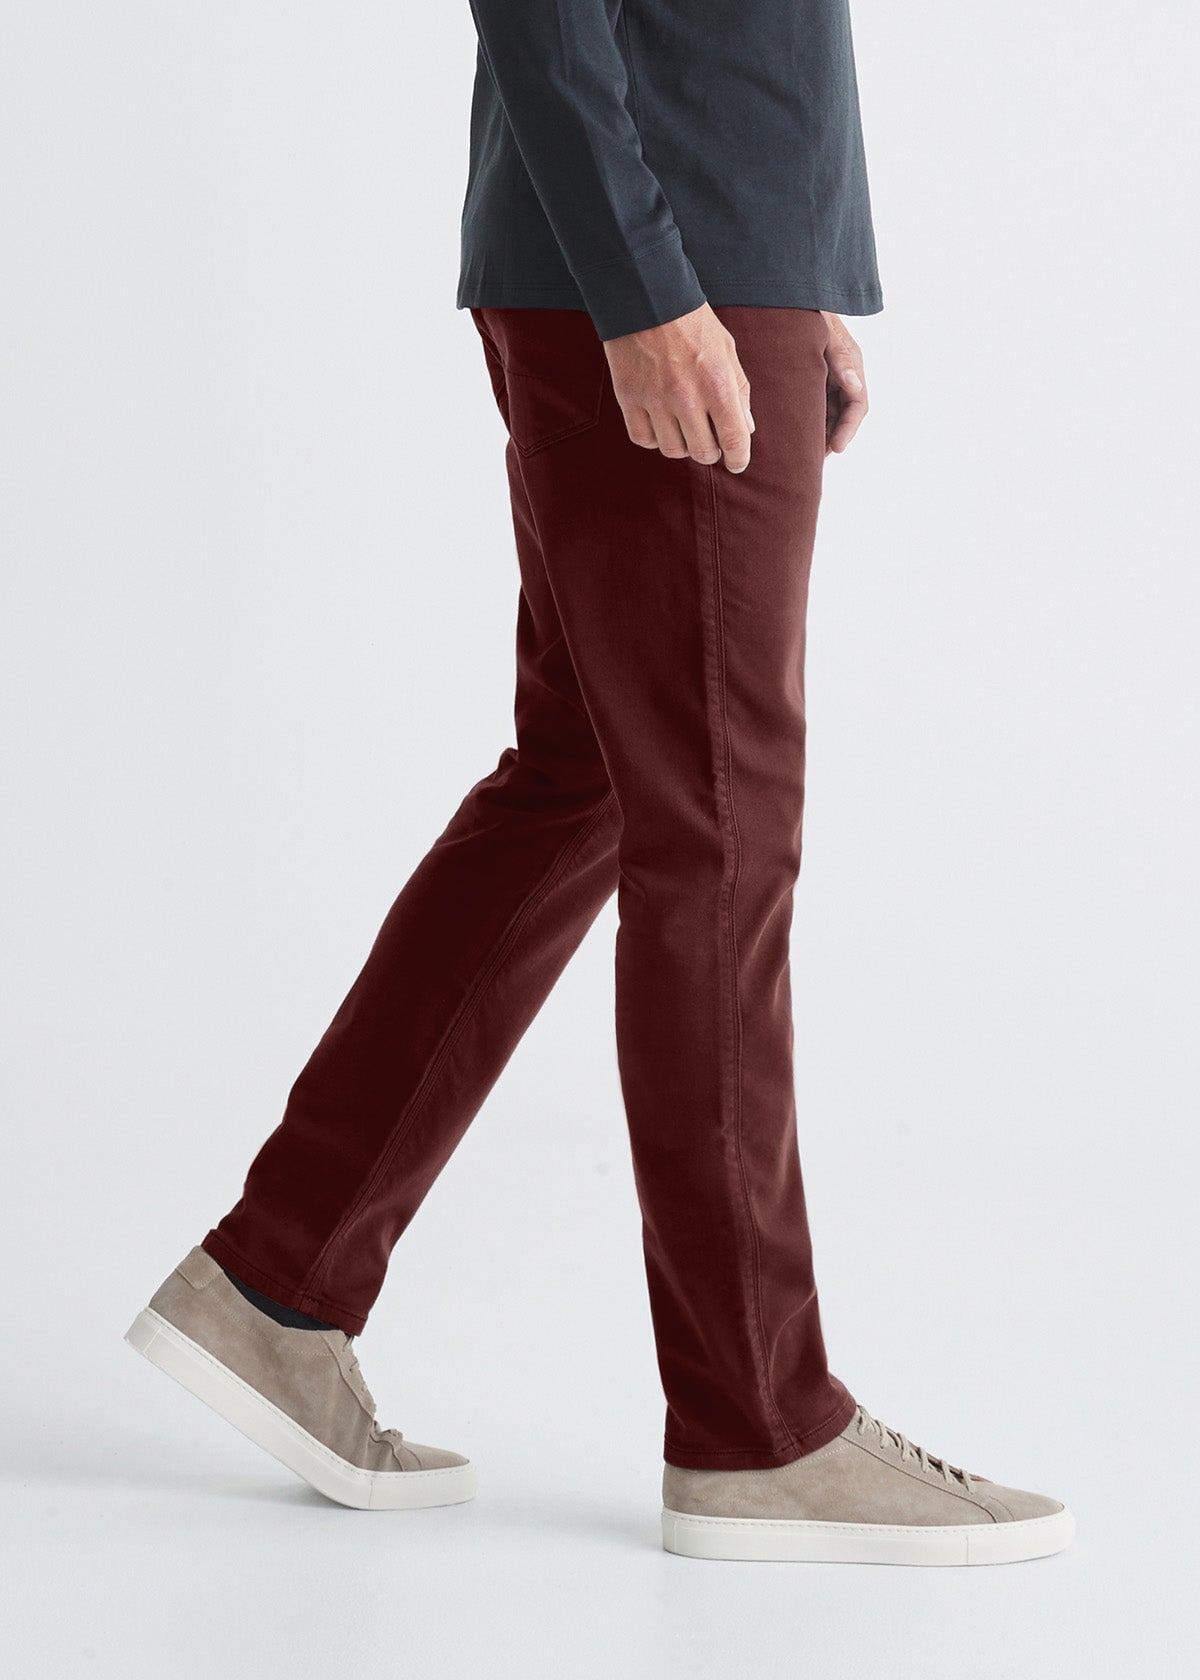 mens dark red relaxed fit dress sweatpant side